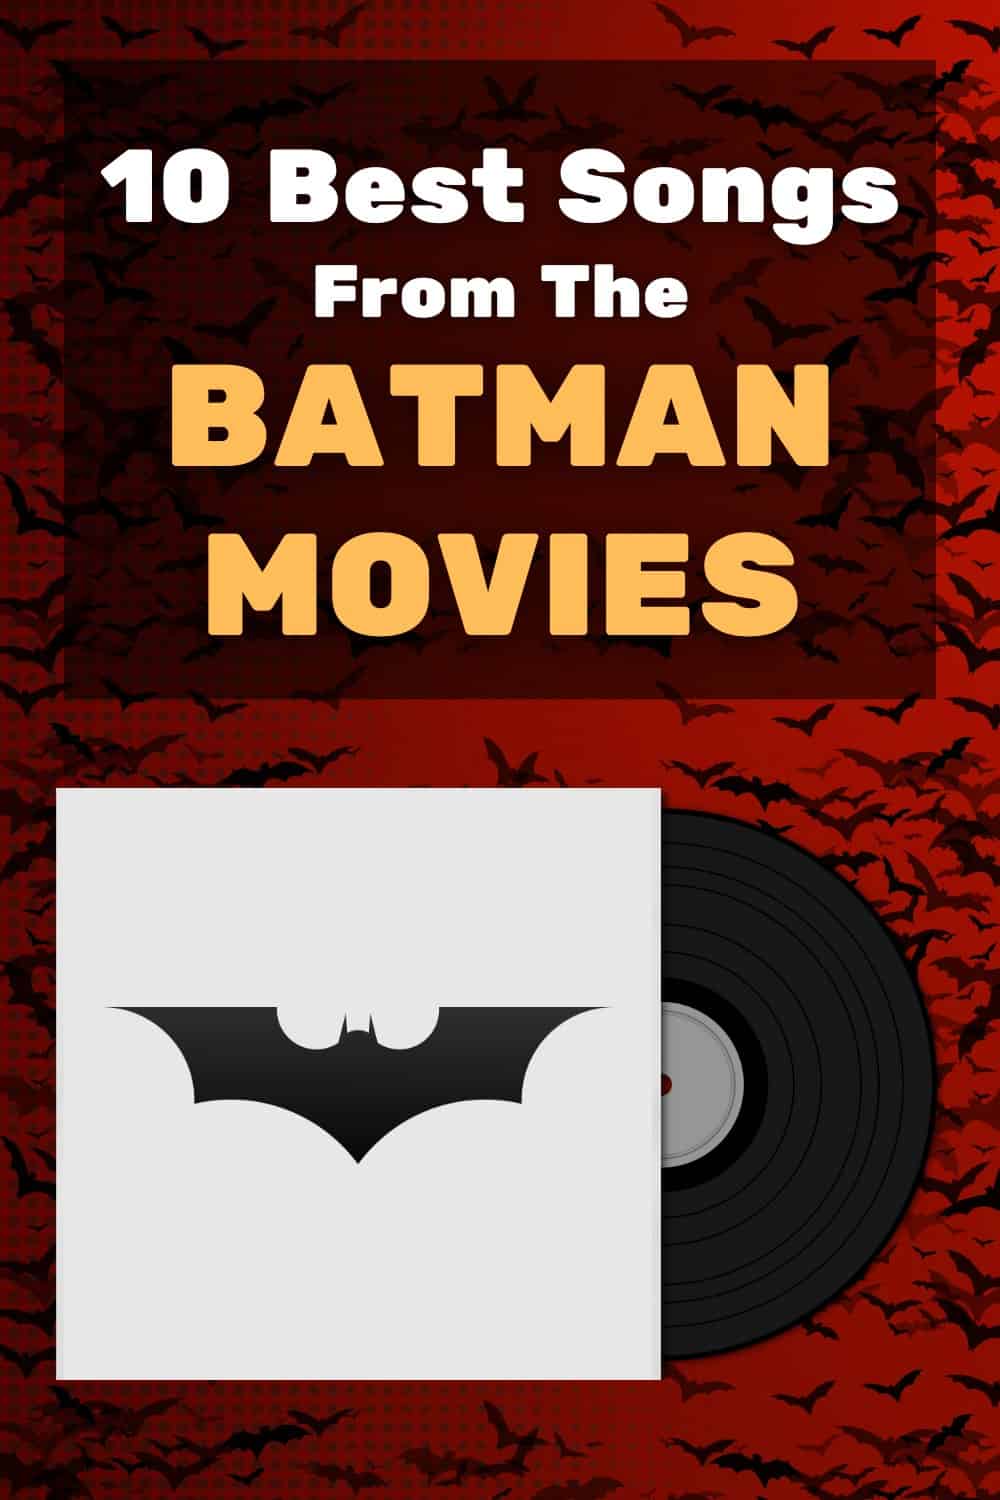 List of Good Songs From Batman Movies